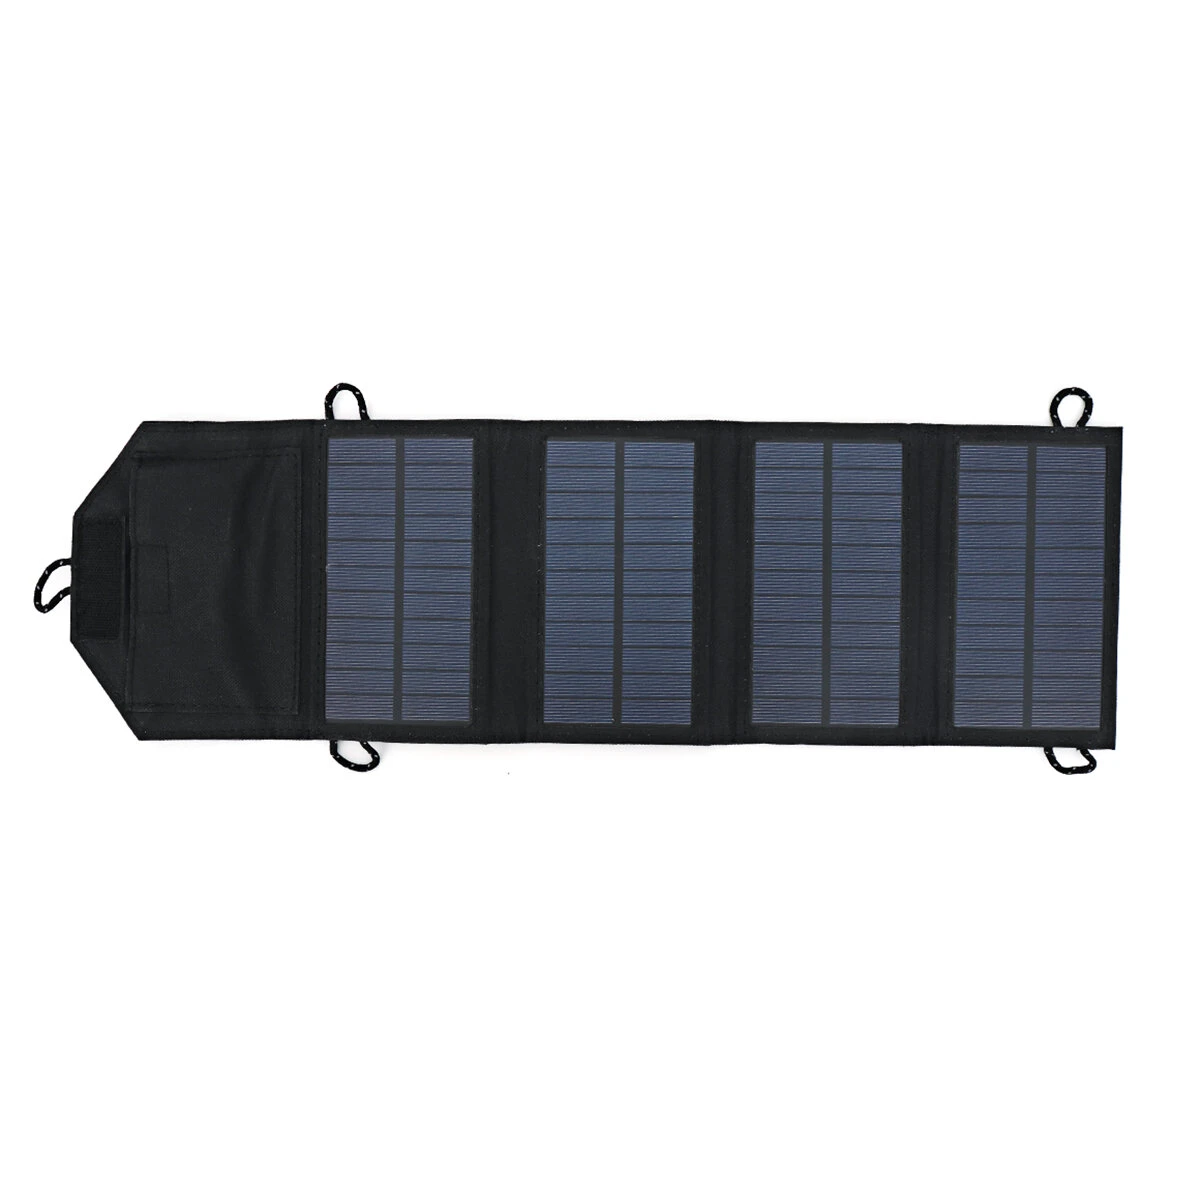 10w polysilicon portable foldable solar panel for outdoor working